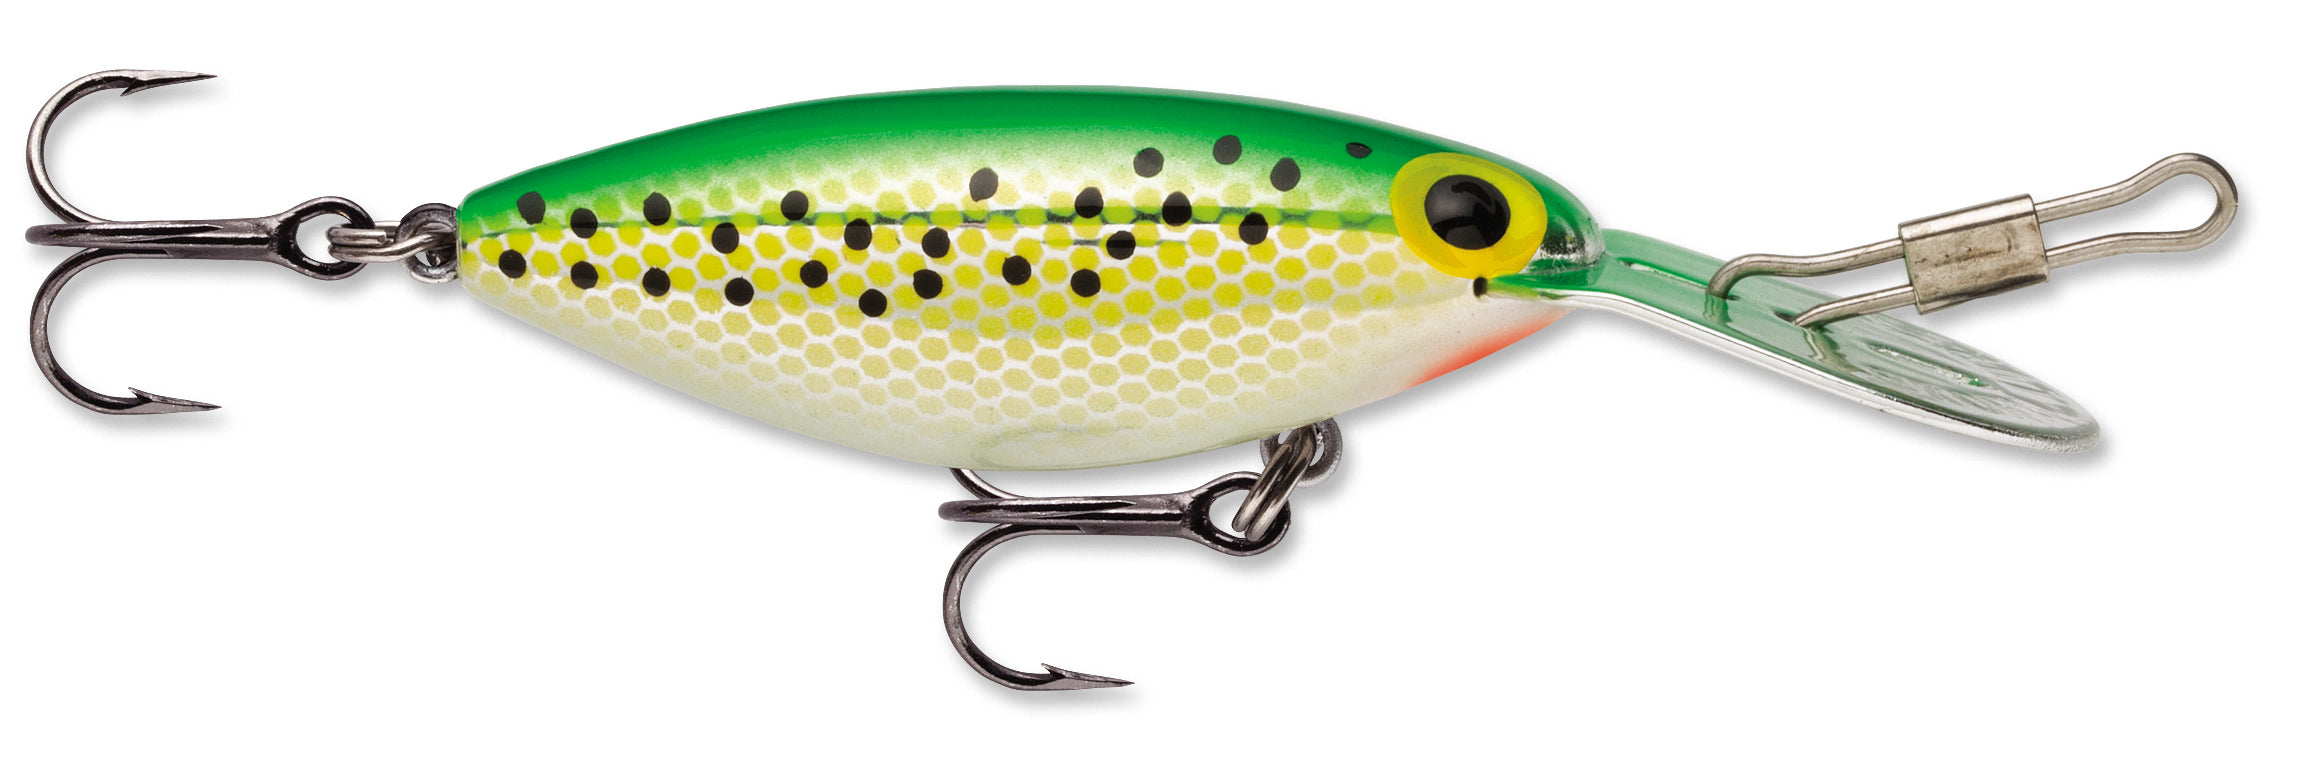 Storm Hot ´N Tot Madflash (Model: HM, Length: 5cm, Weight: 5g, Colour: 652)  [STORMHM652] - €2.61 : 24Tackle, Fishing Tackle Online Store